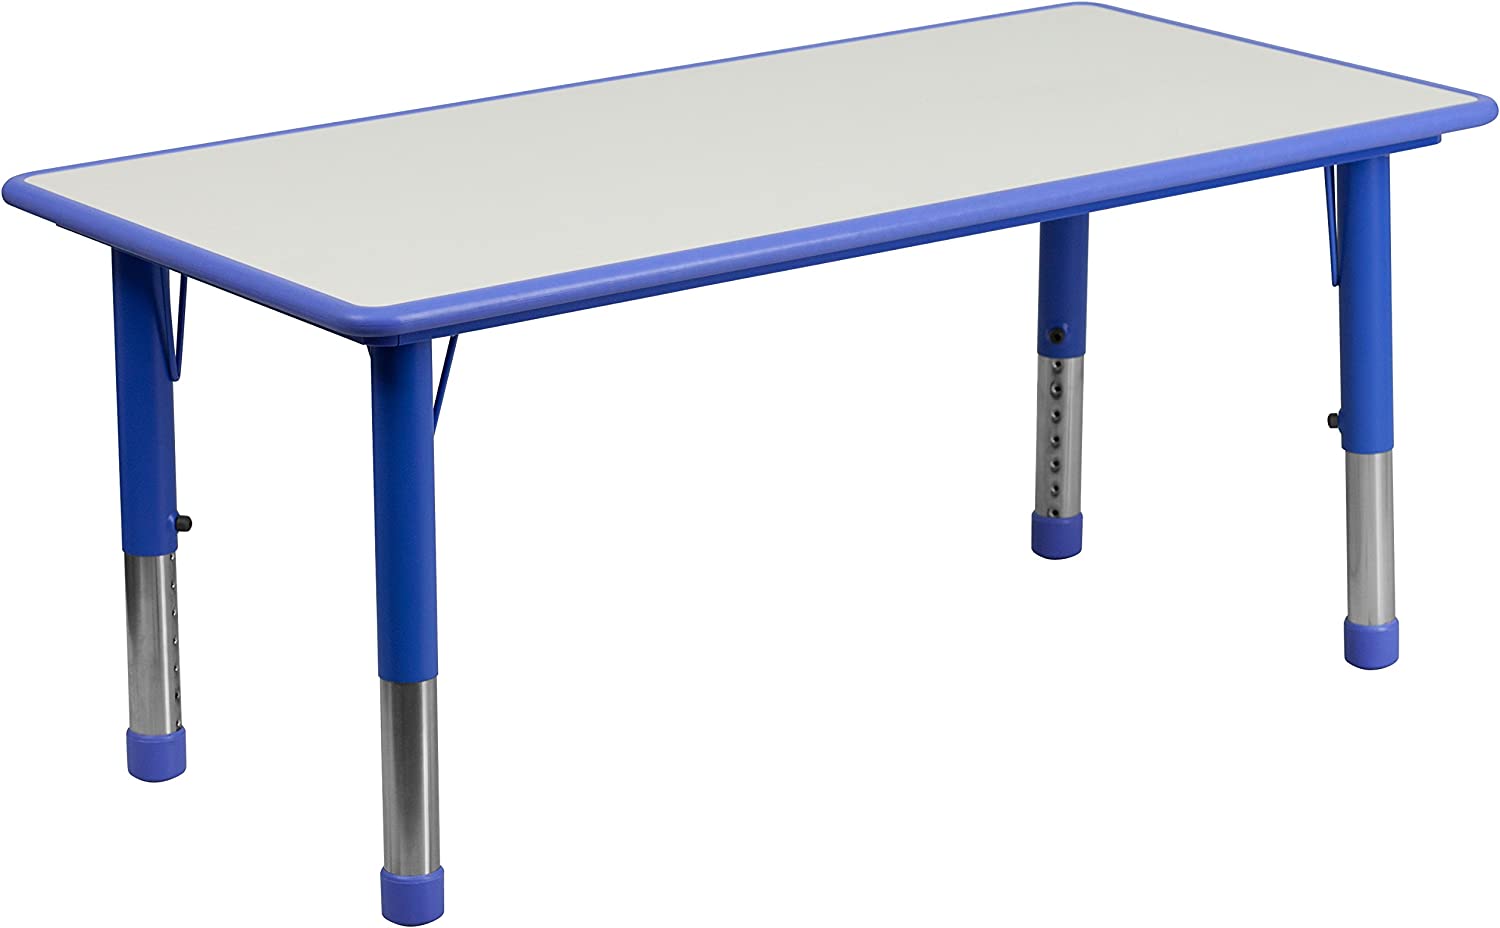 Our Top Picks for the Best Classroom Tables for Kids - Emirates ...